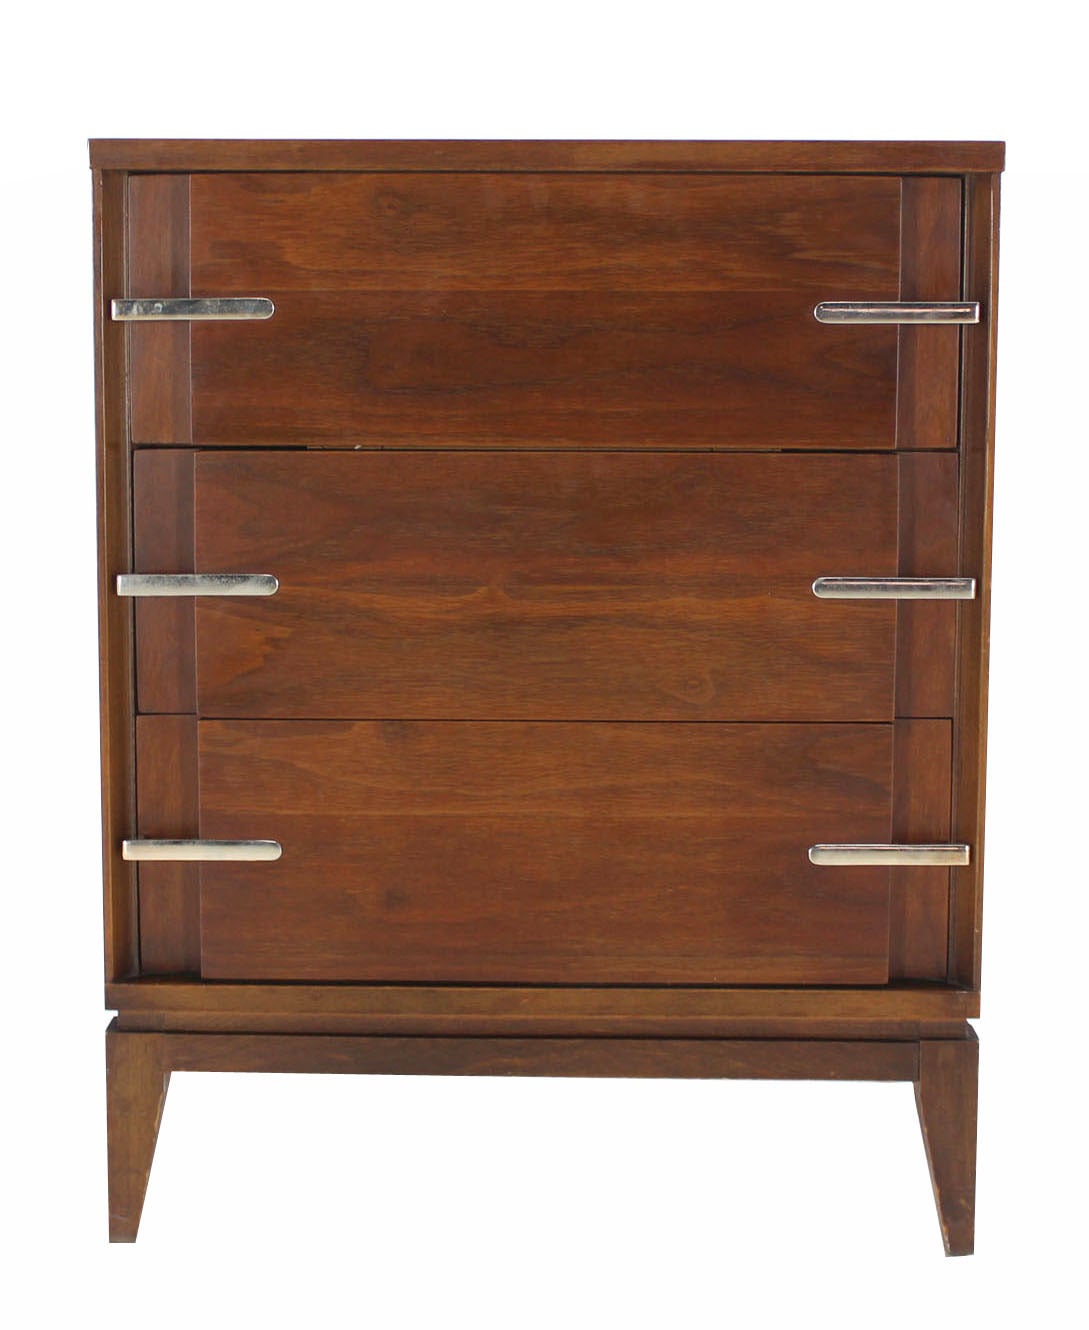 20th Century Mid-Century Modern Walnut Bachelor Chest or Dresser with Accent Drawer Pulls